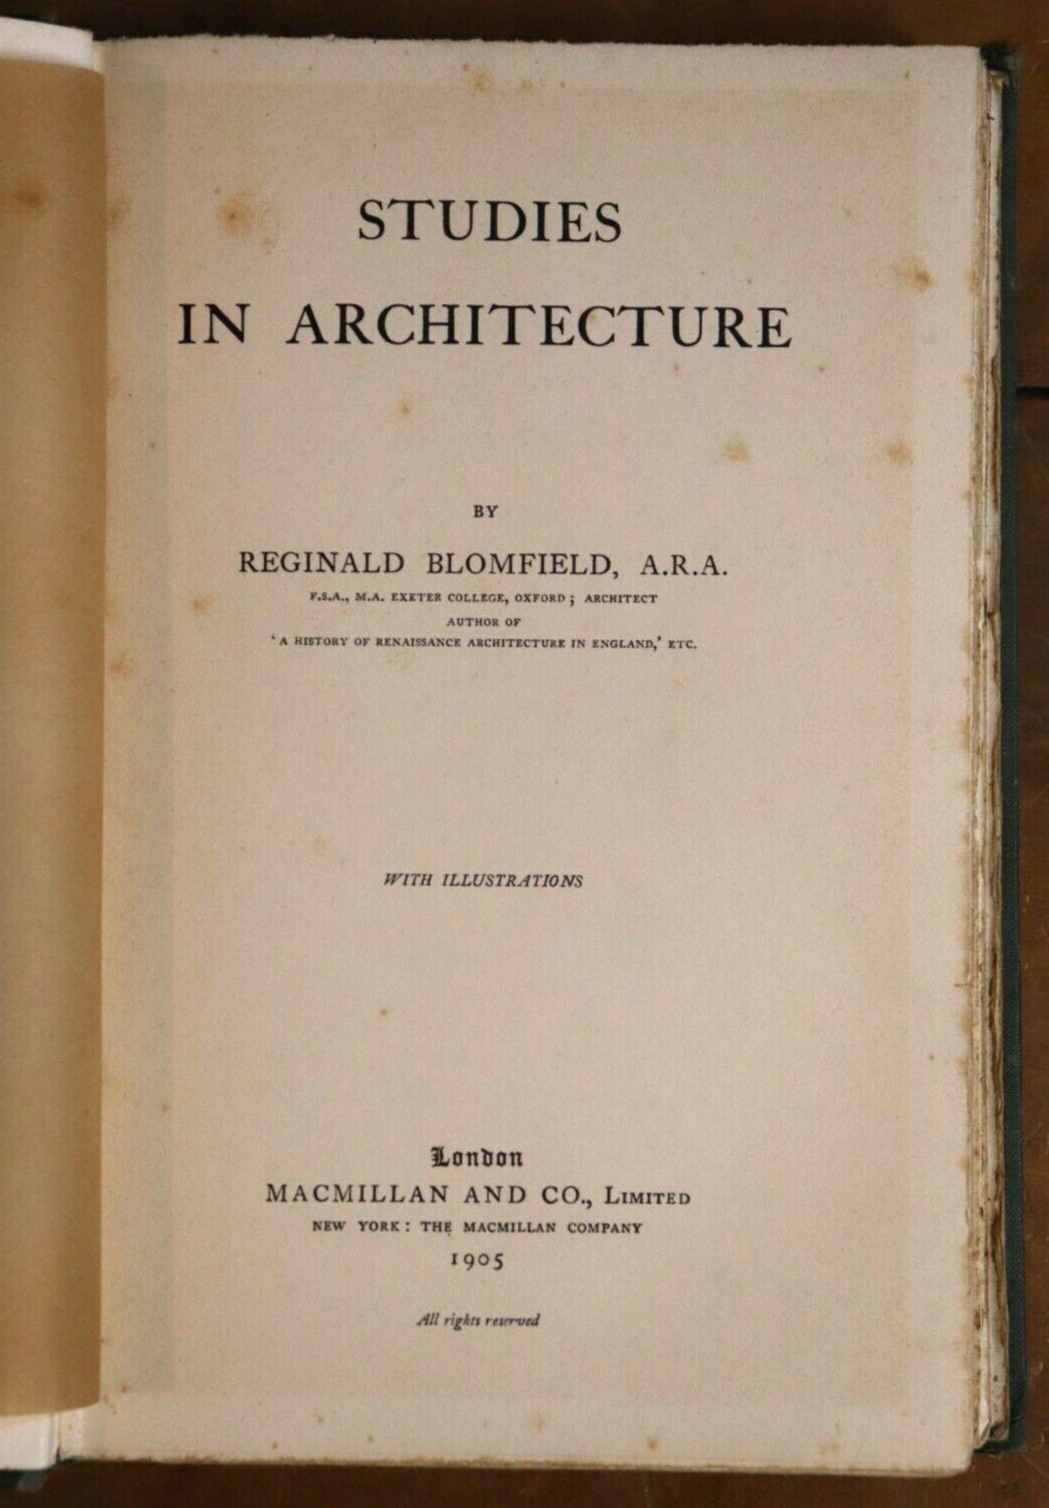 1905 Studies In Architecture by R. Blomfield 1st Ed. Antique Architecture Book - 0